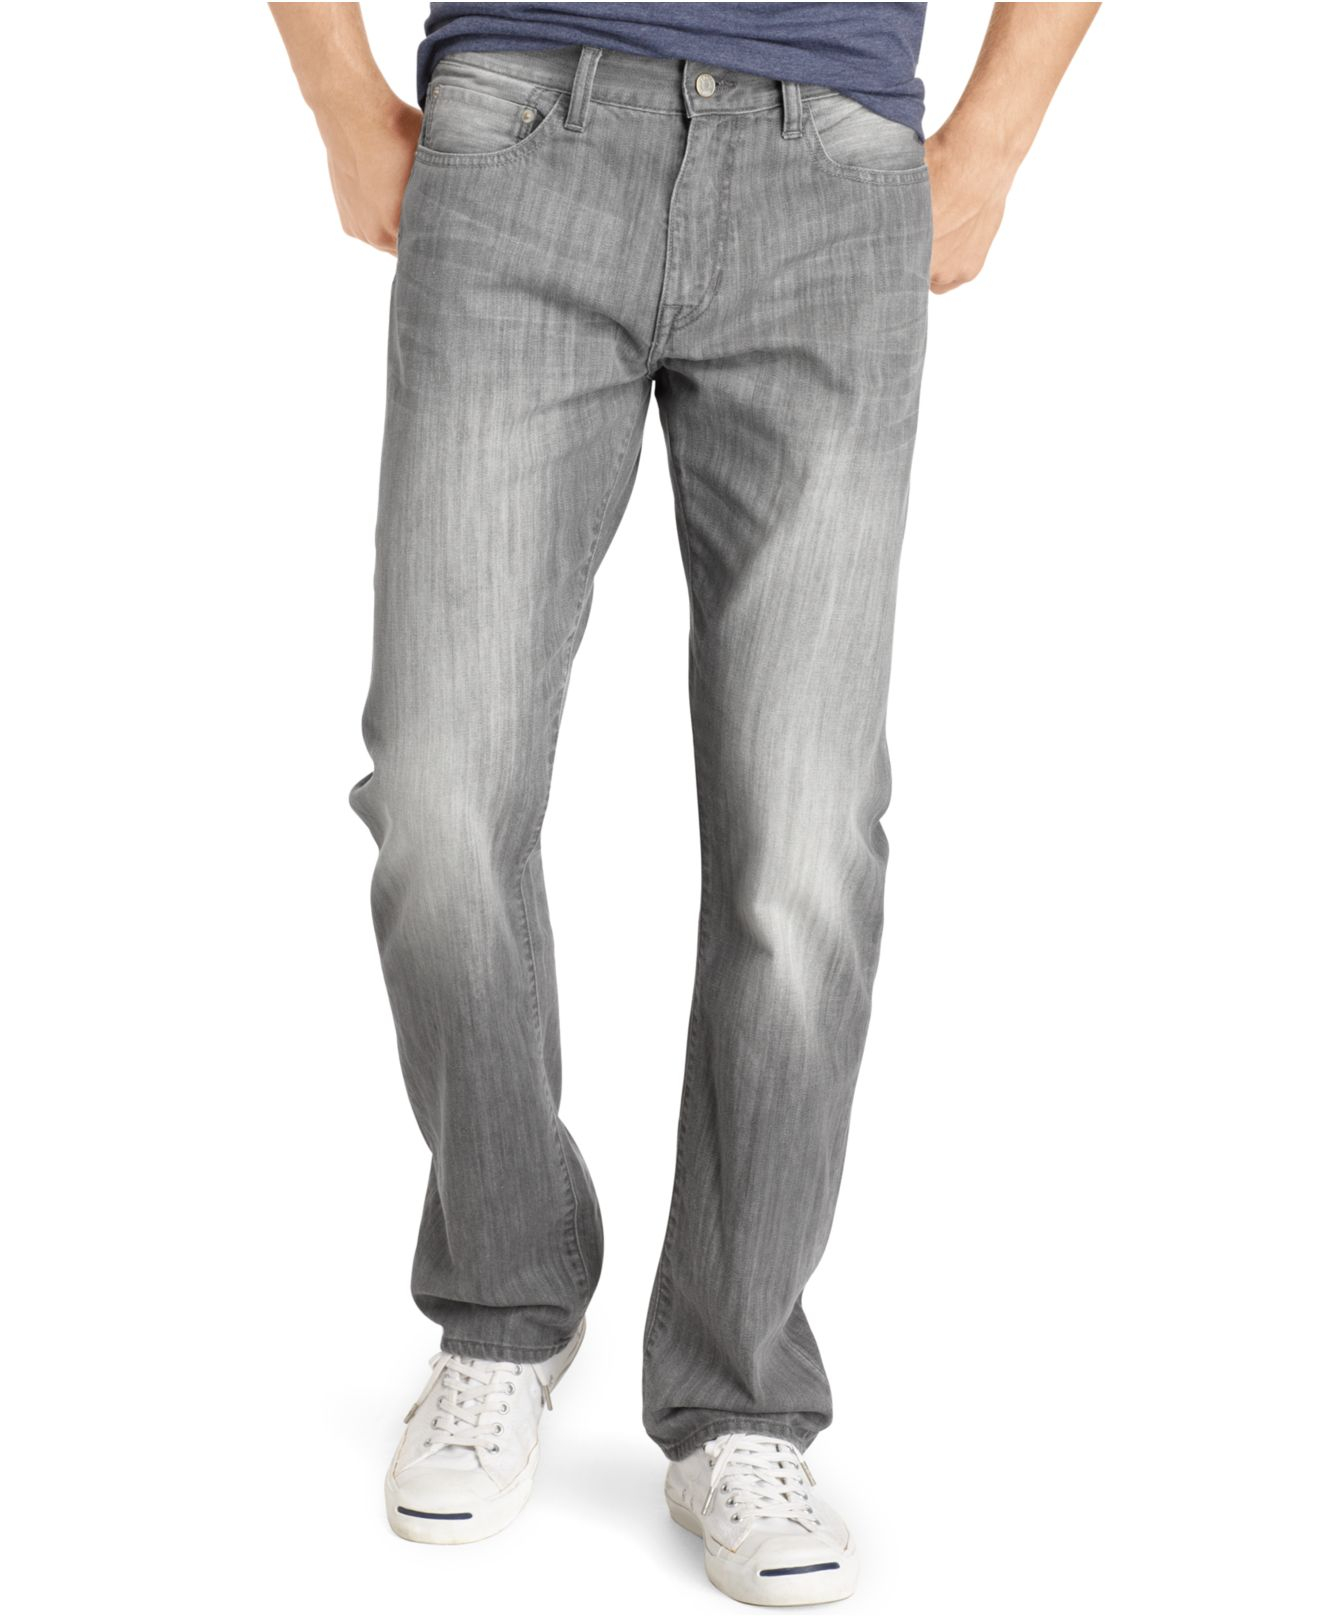 Lyst - Izod Straight-Fit Grey Used Jeans in Gray for Men